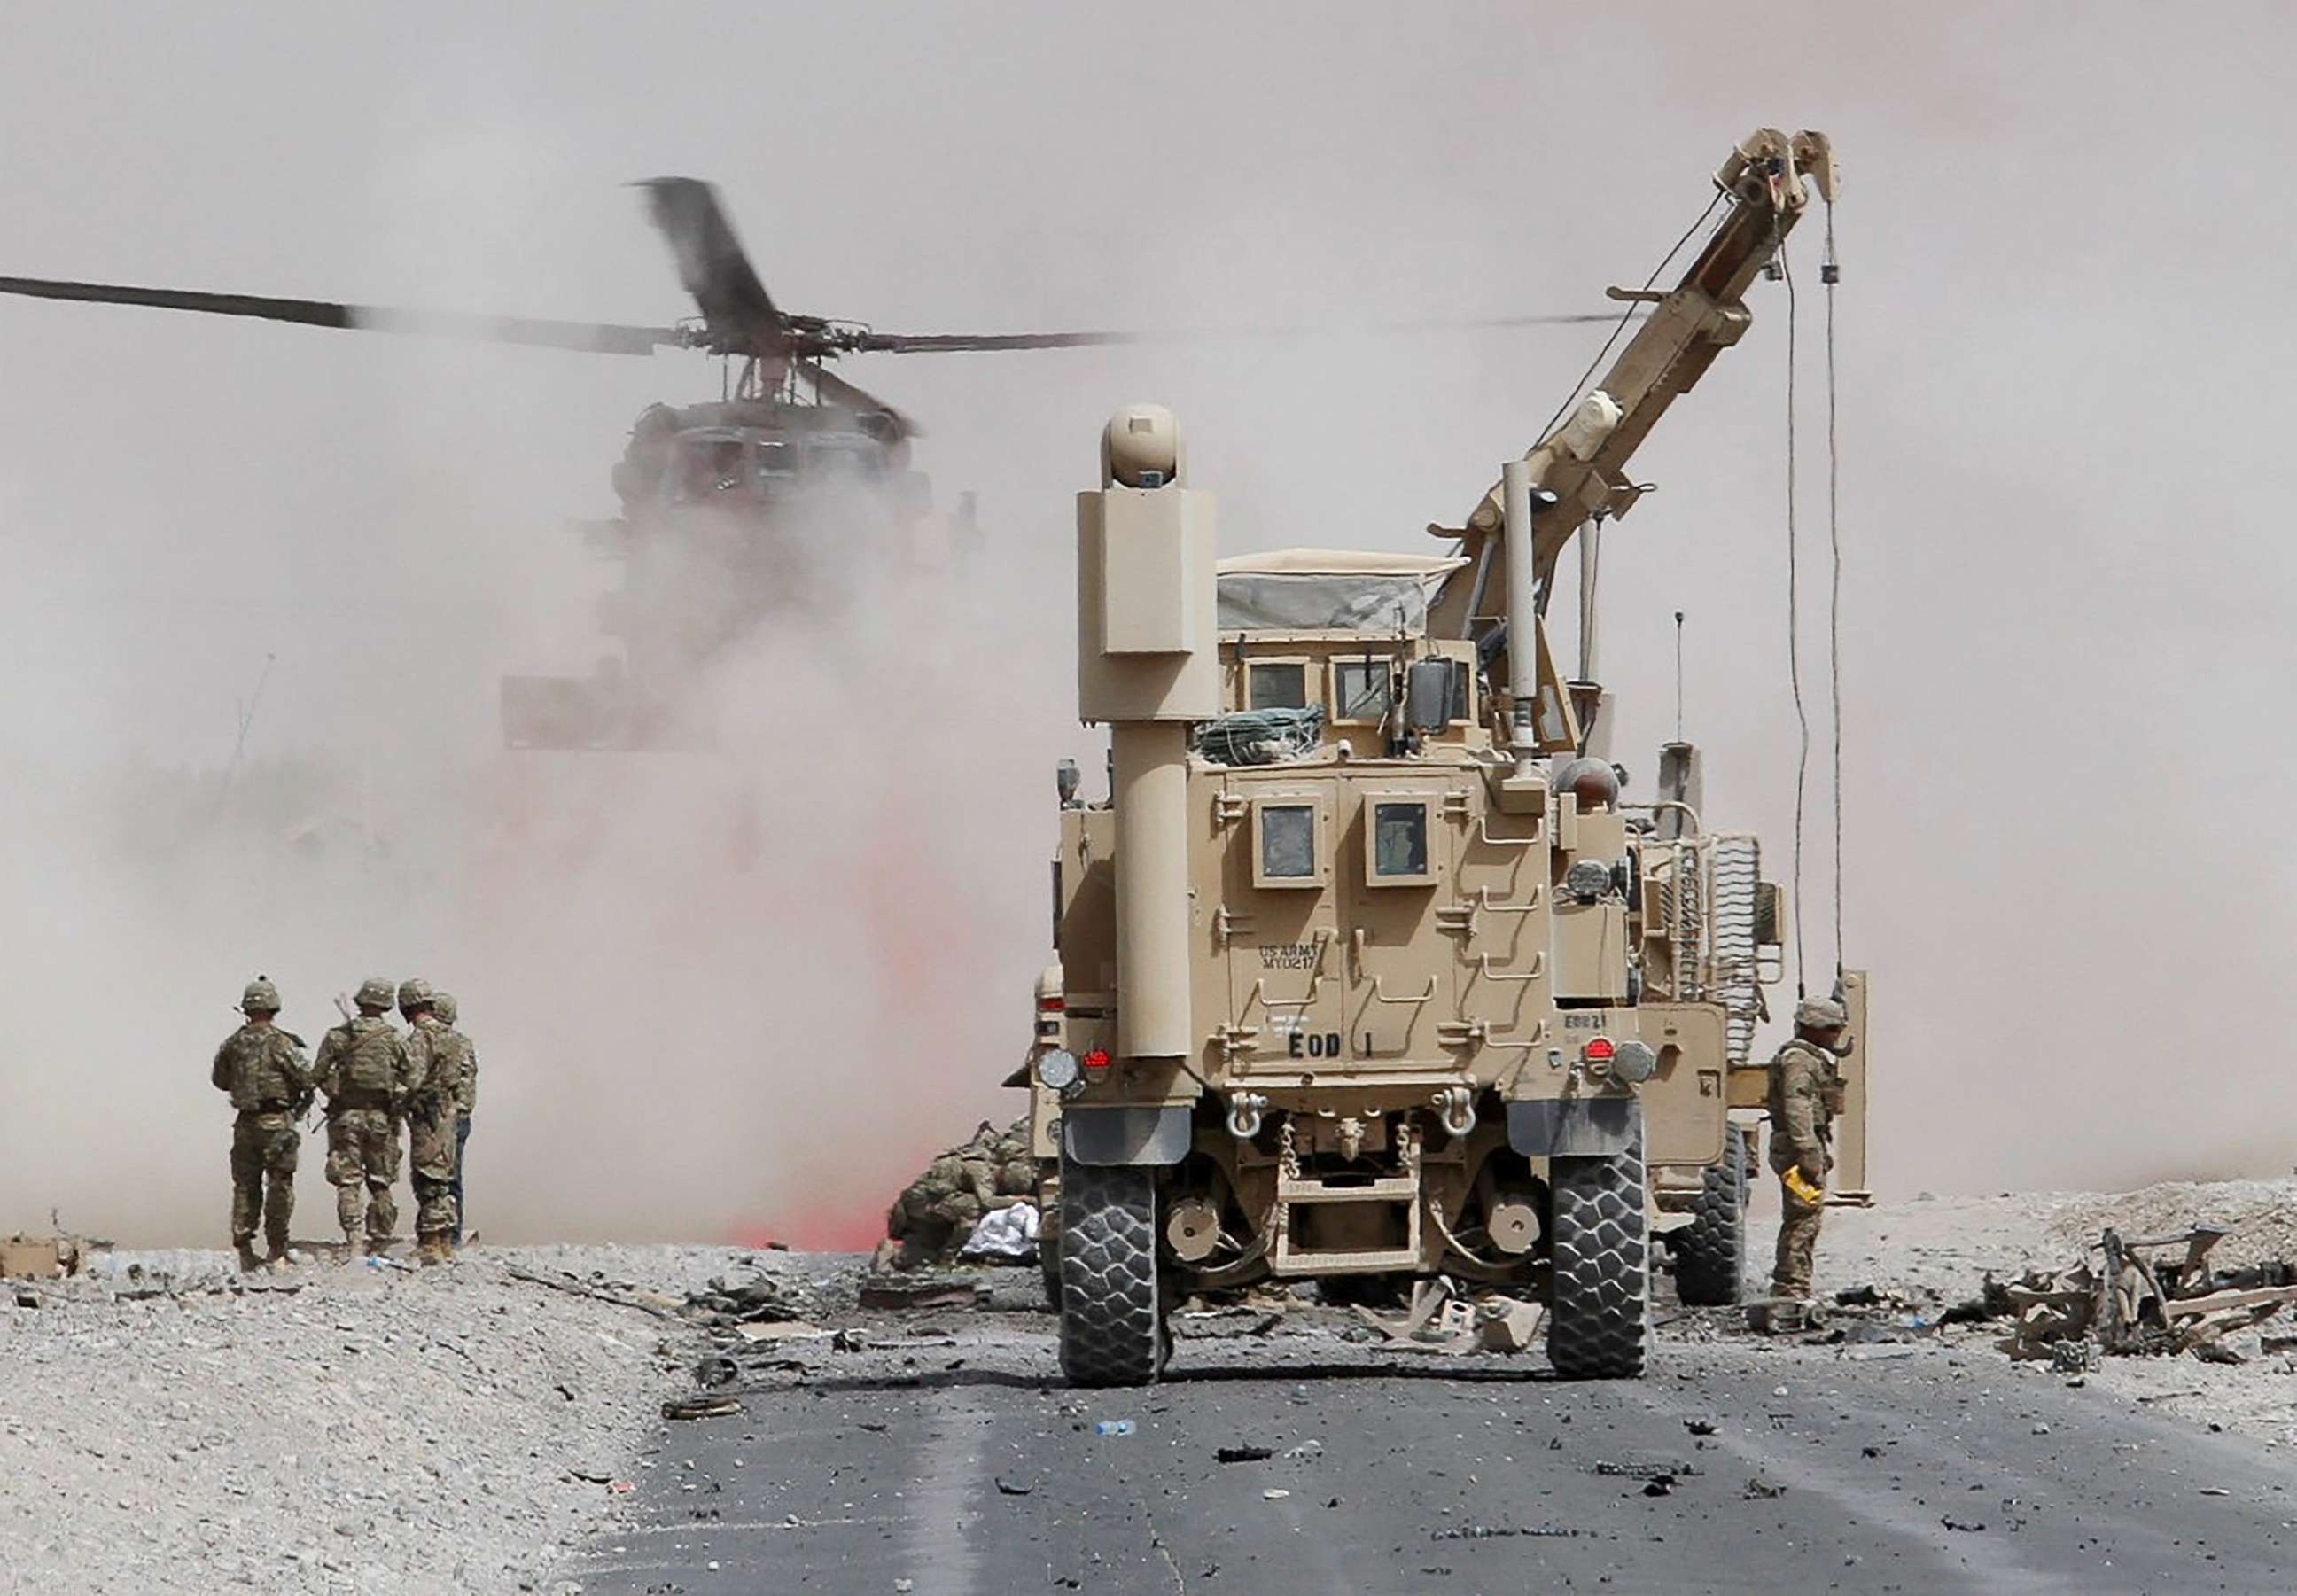 PHOTO: U.S. troops assess the damage to an armored vehicle of the NATO-led military coalition after a suicide attack in Kandahar province, Afghanistan, Aug. 2, 2017.